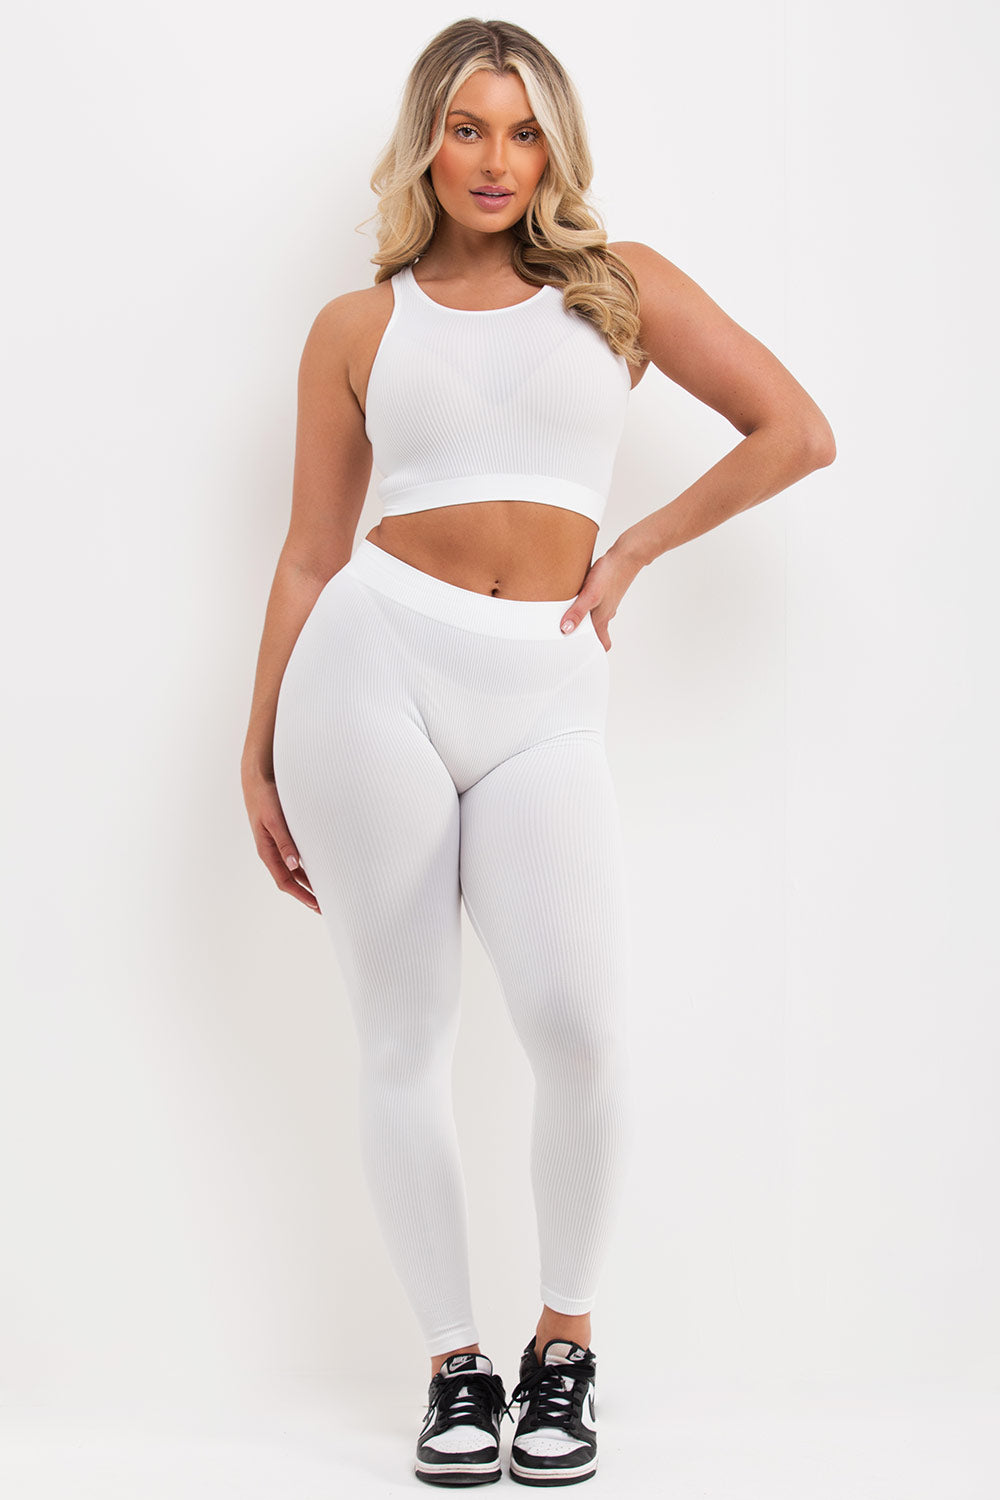 white ribbed leggings and crop top co ord set uk